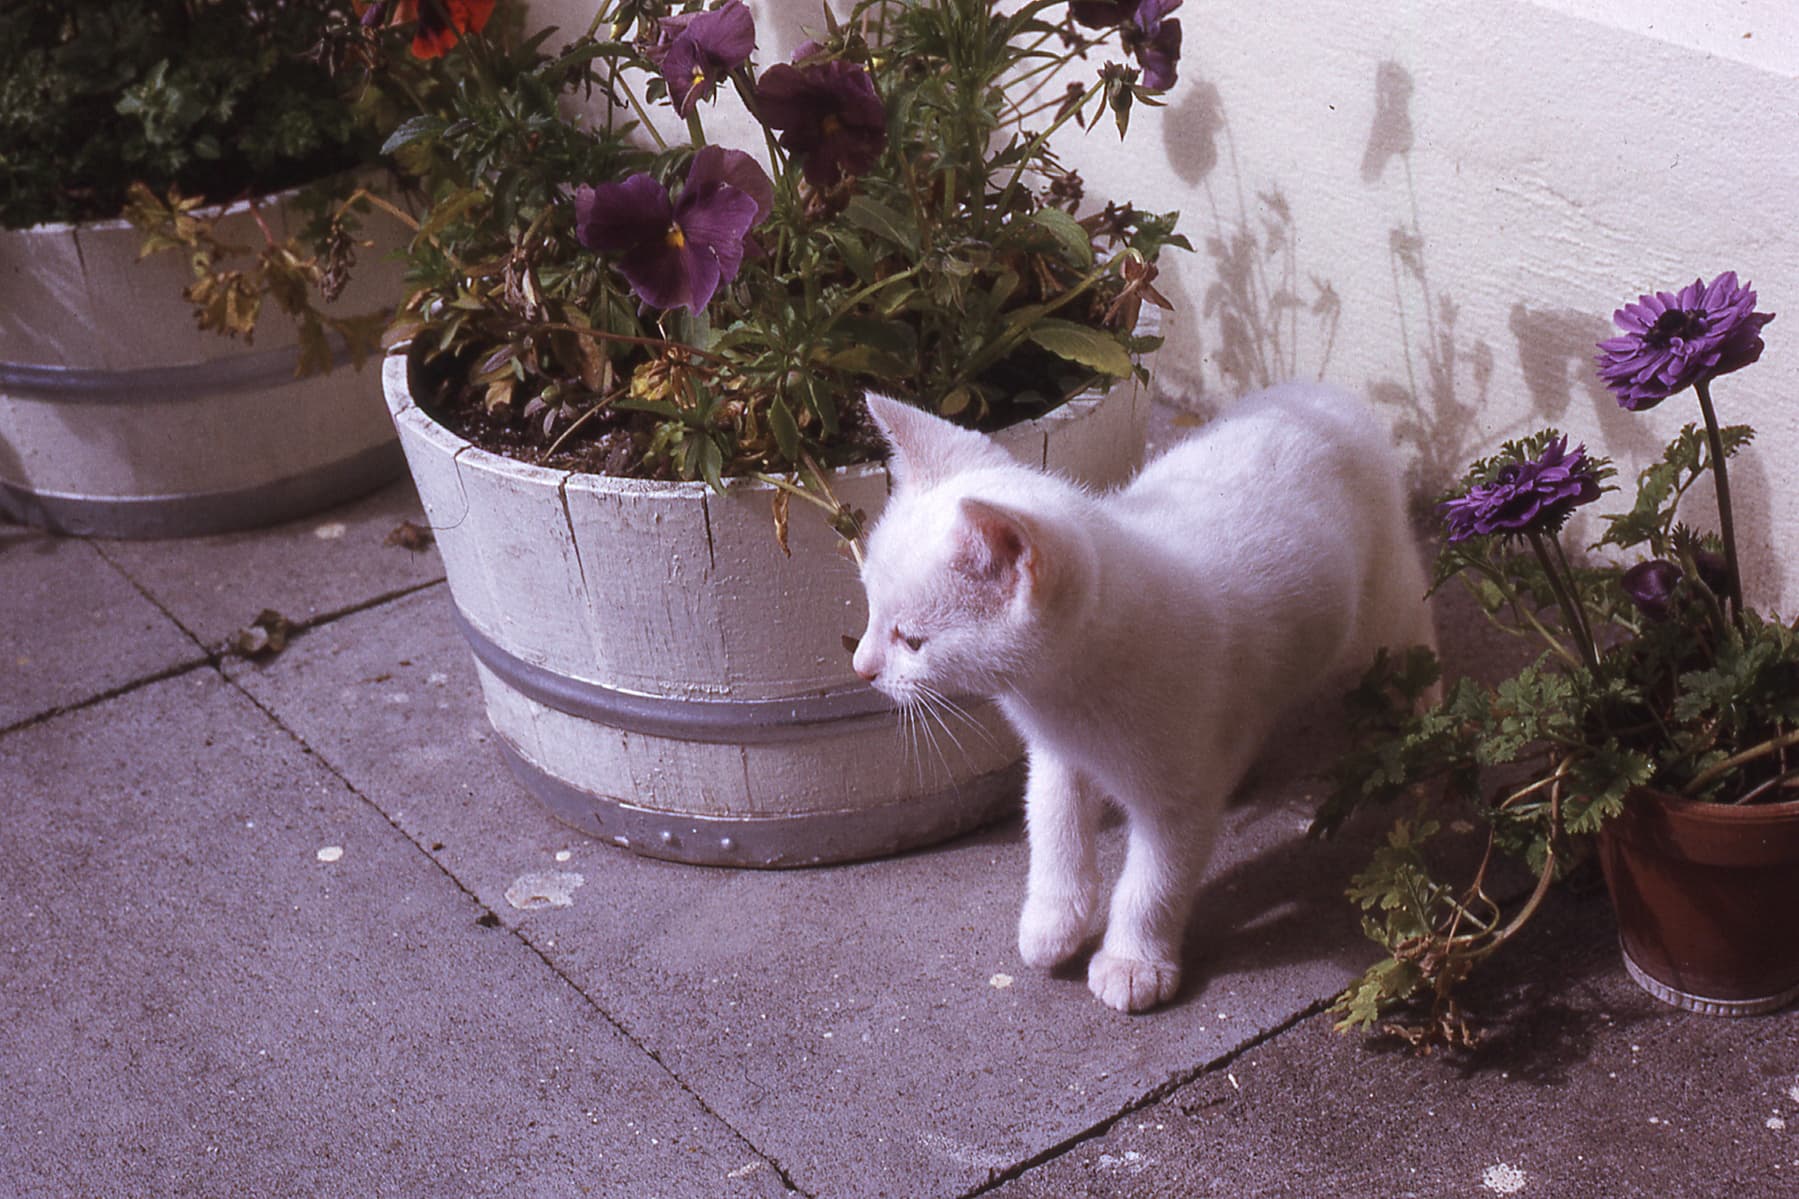 The white kitten stands confident between a pair of outdoor flower pots.